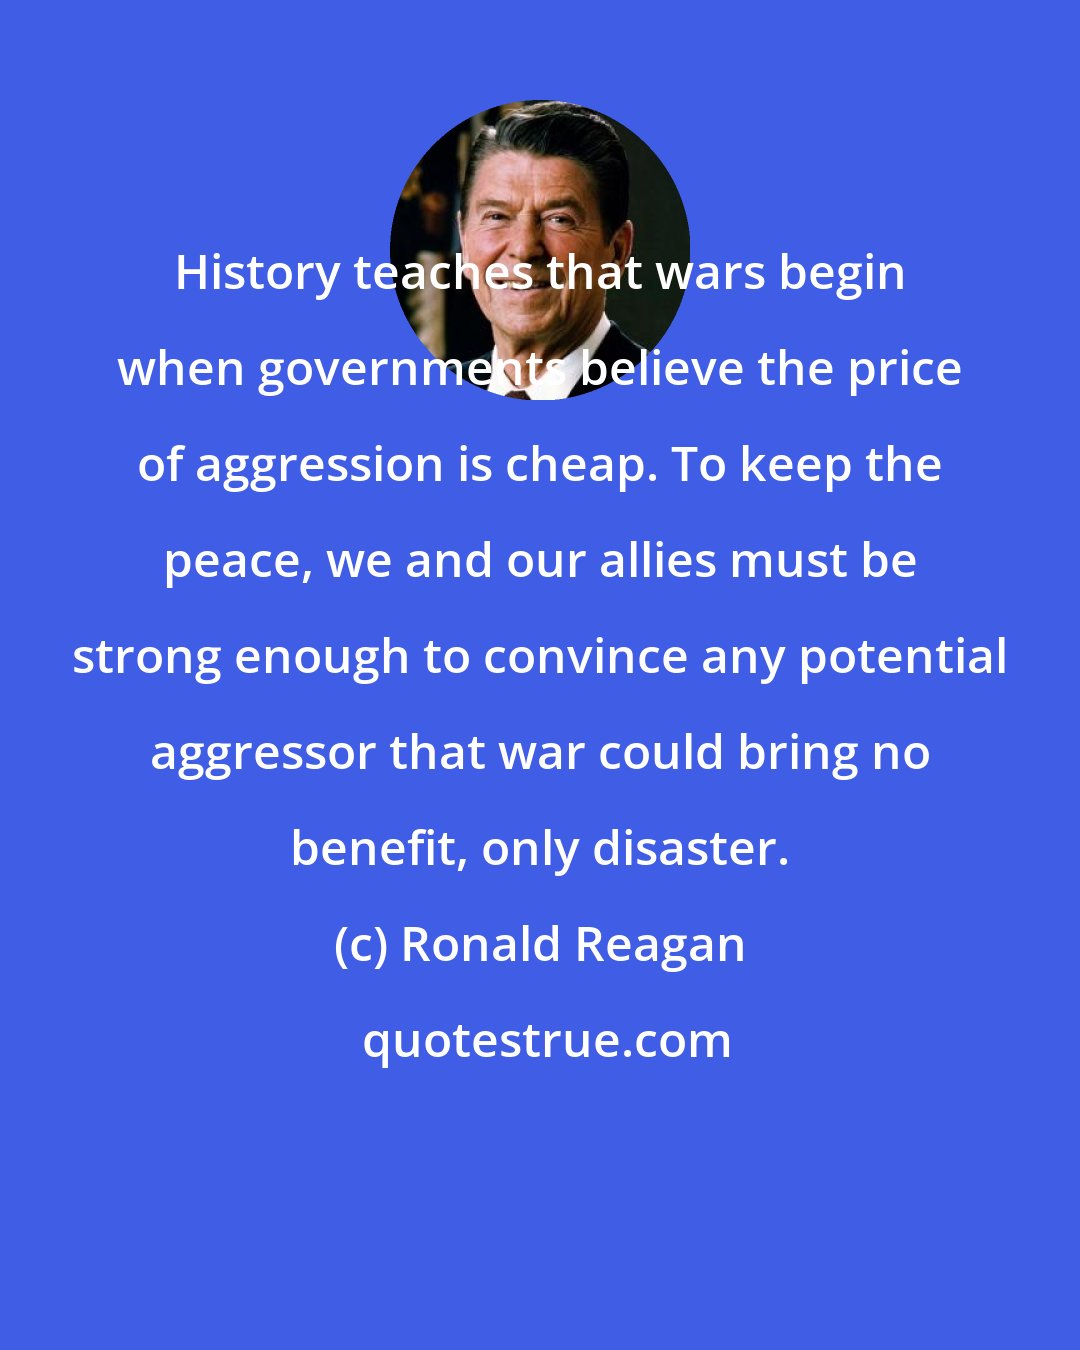 Ronald Reagan: History teaches that wars begin when governments believe the price of aggression is cheap. To keep the peace, we and our allies must be strong enough to convince any potential aggressor that war could bring no benefit, only disaster.